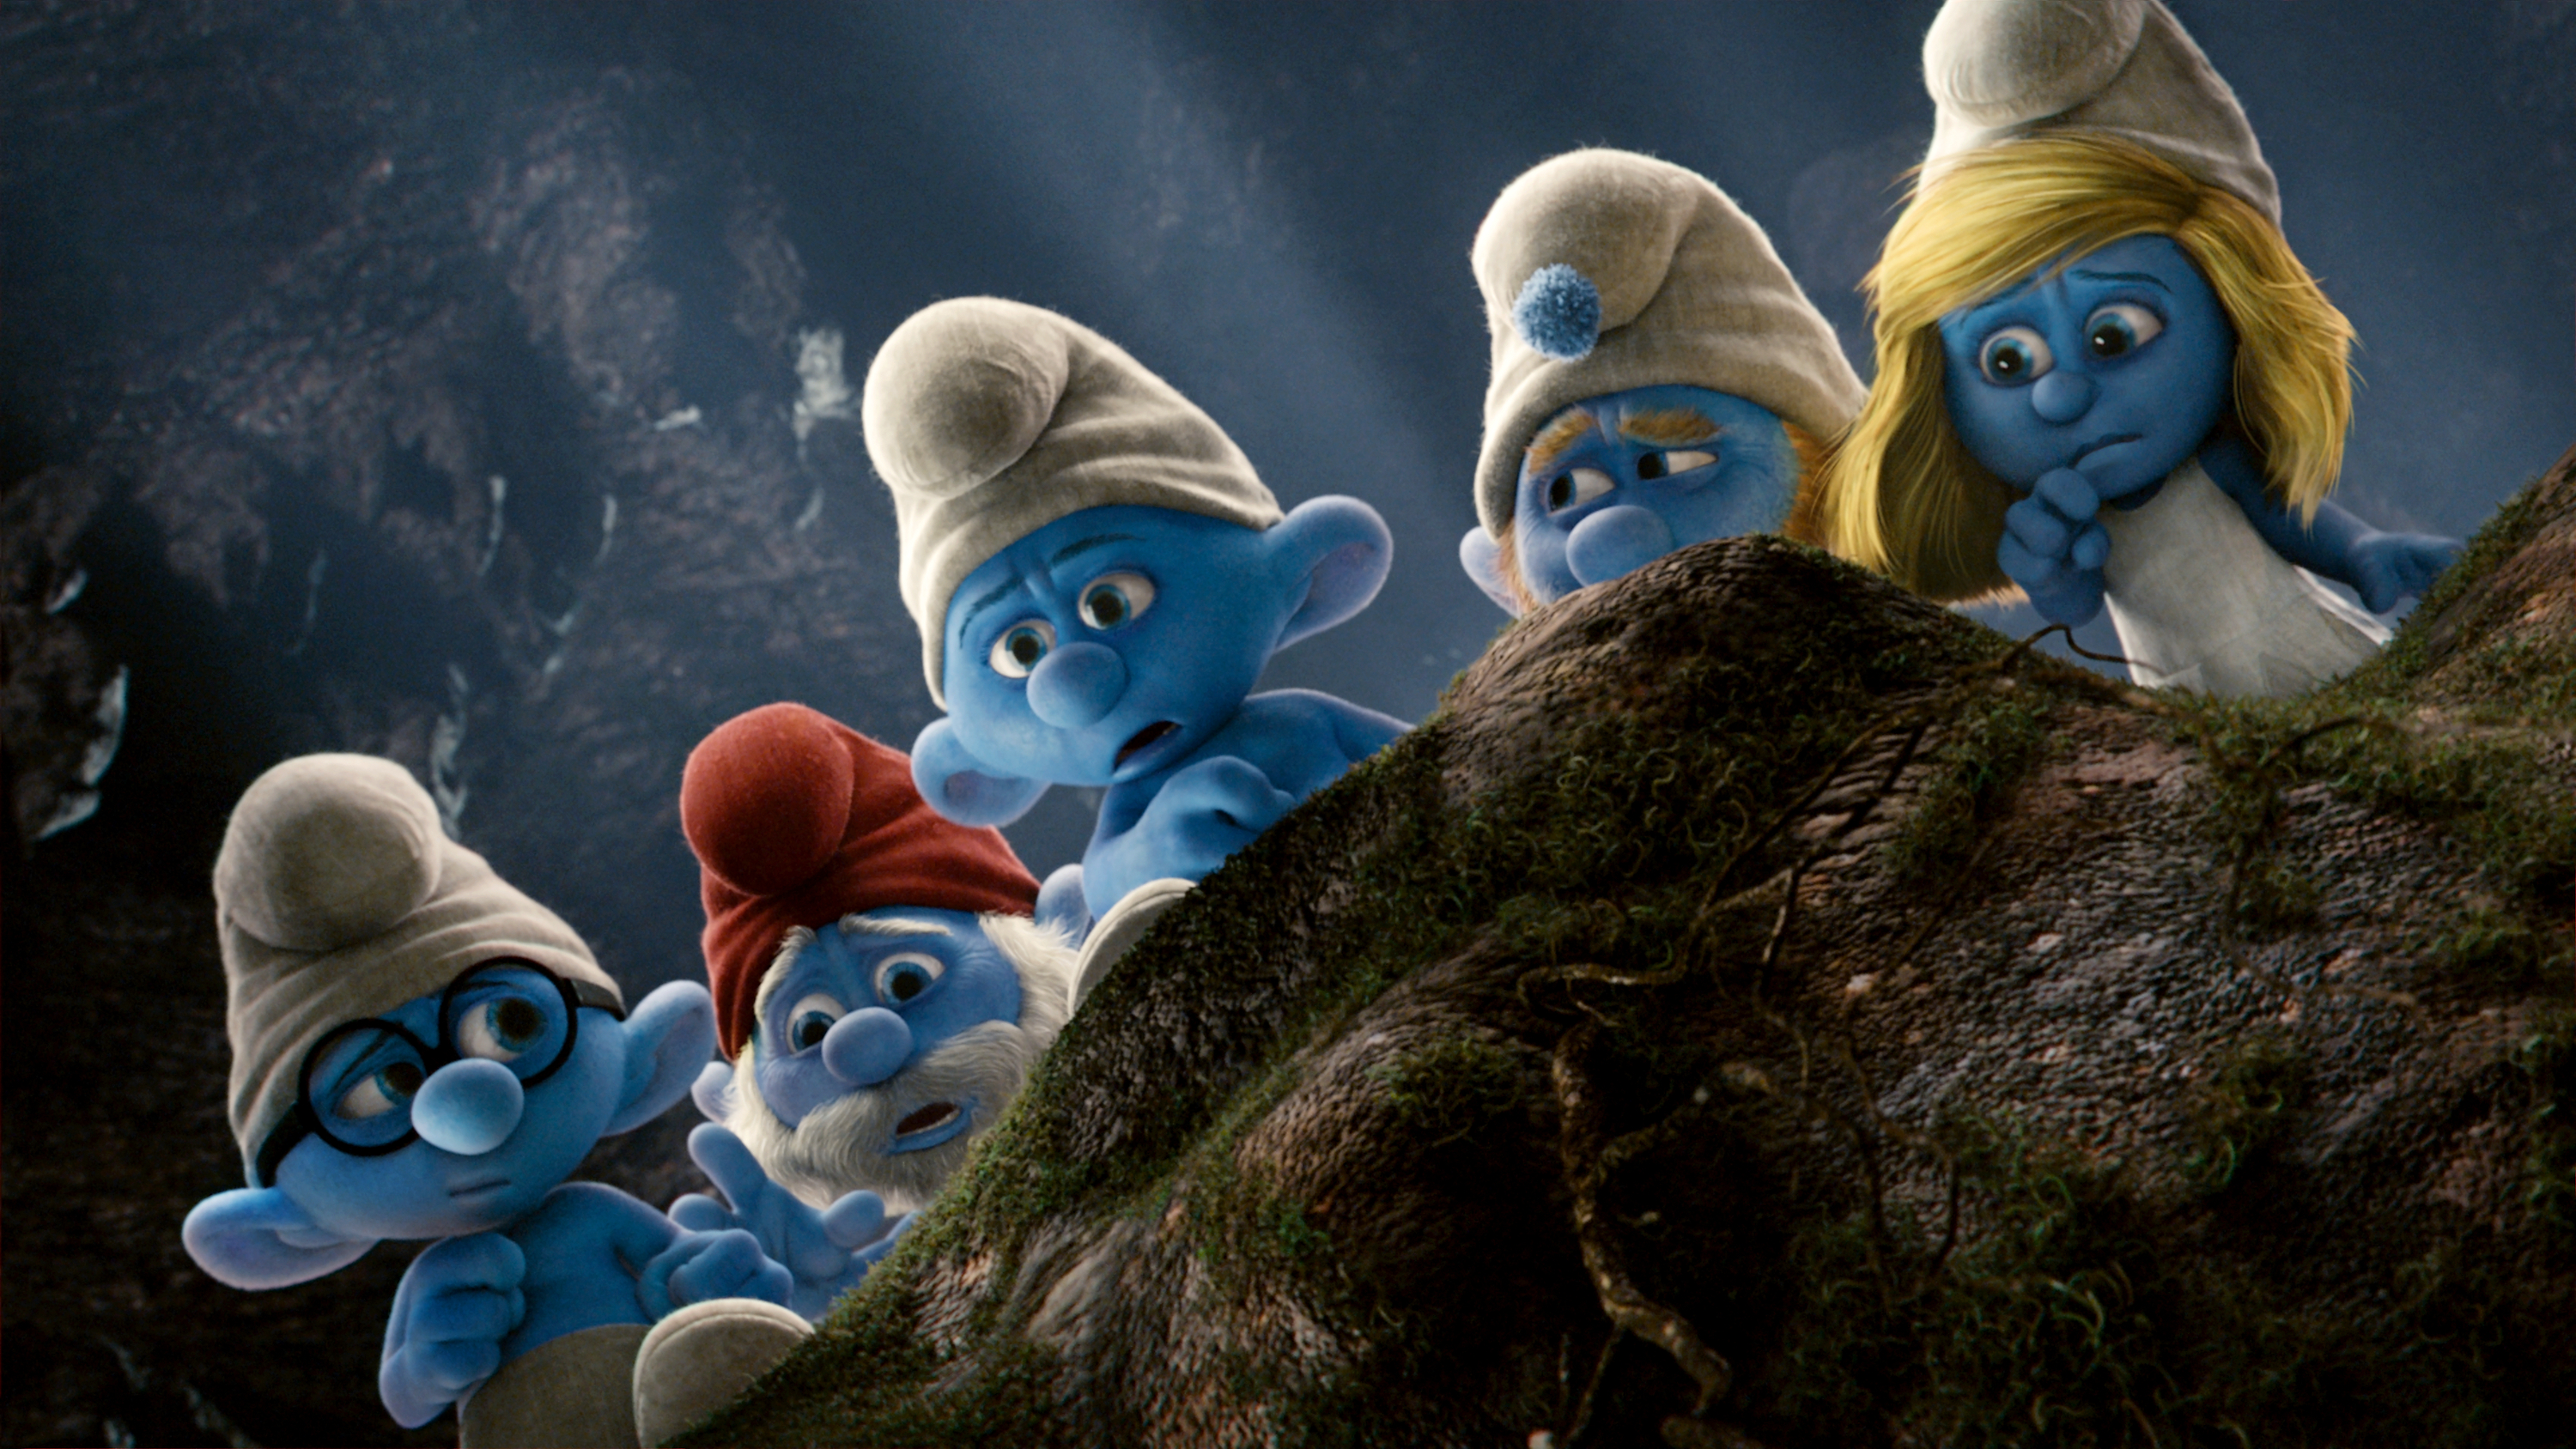 Games Based On The Smurfs That You Didn't Know About